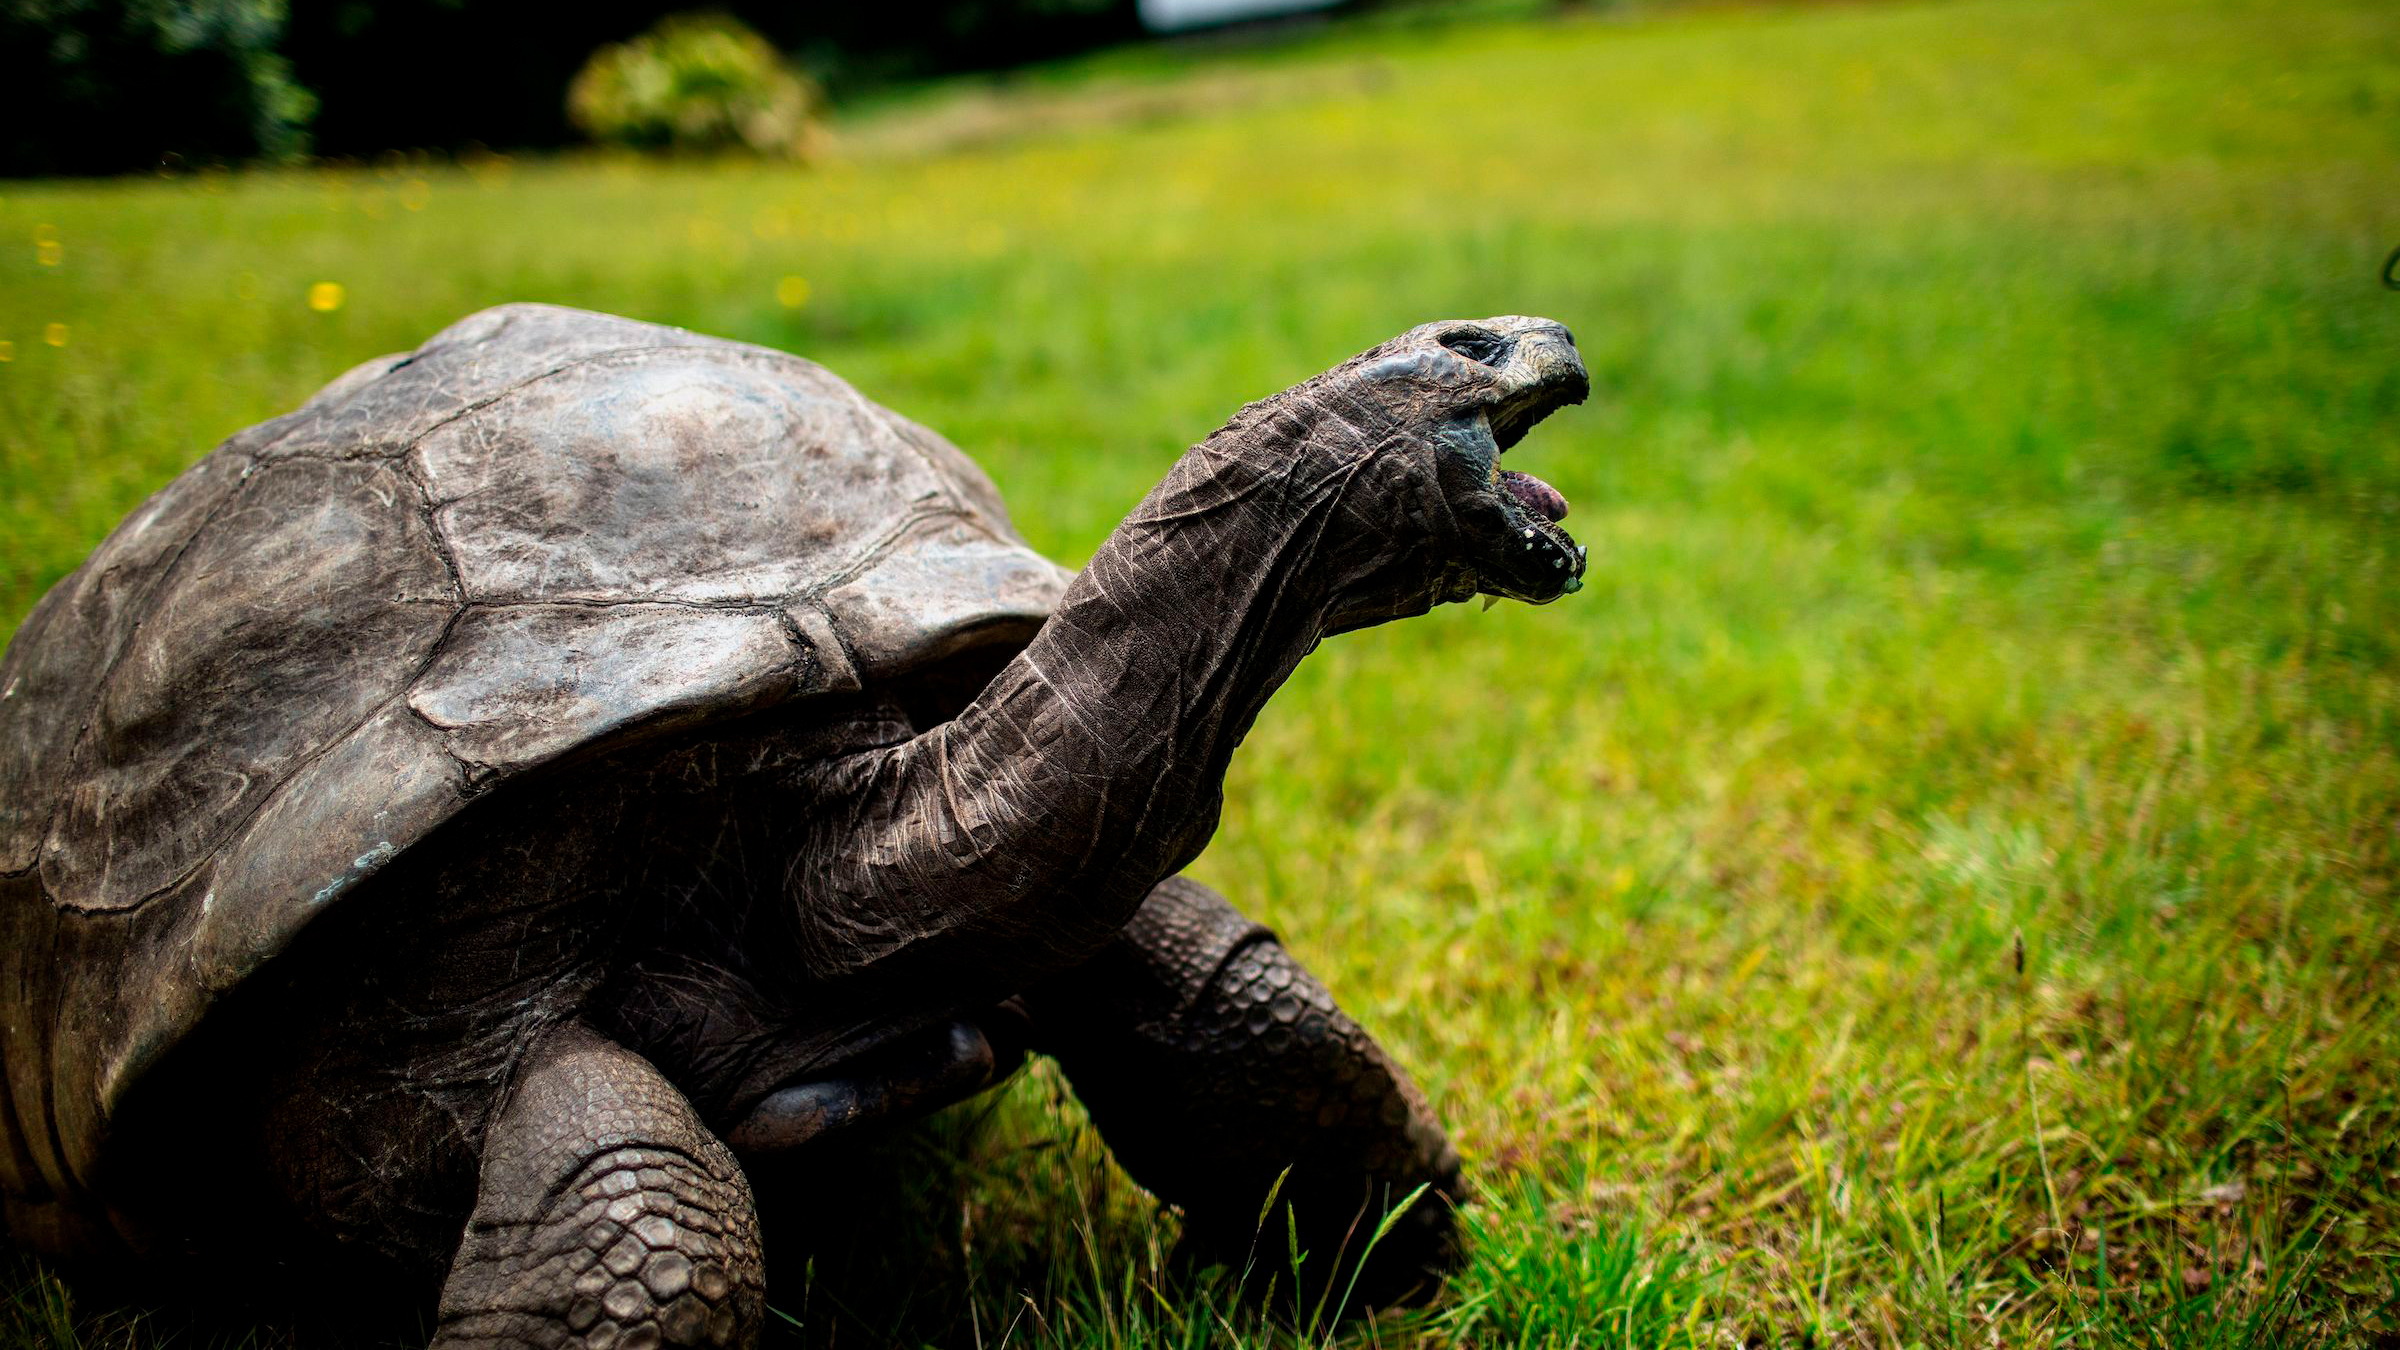 A 2017 photo of Jonathan, a Seychelles giant tortoise thought to be the oldest reptile living on Earth. Jonathan lives on Saint Helena, a British Overseas Territory in the South Atlantic Ocean.